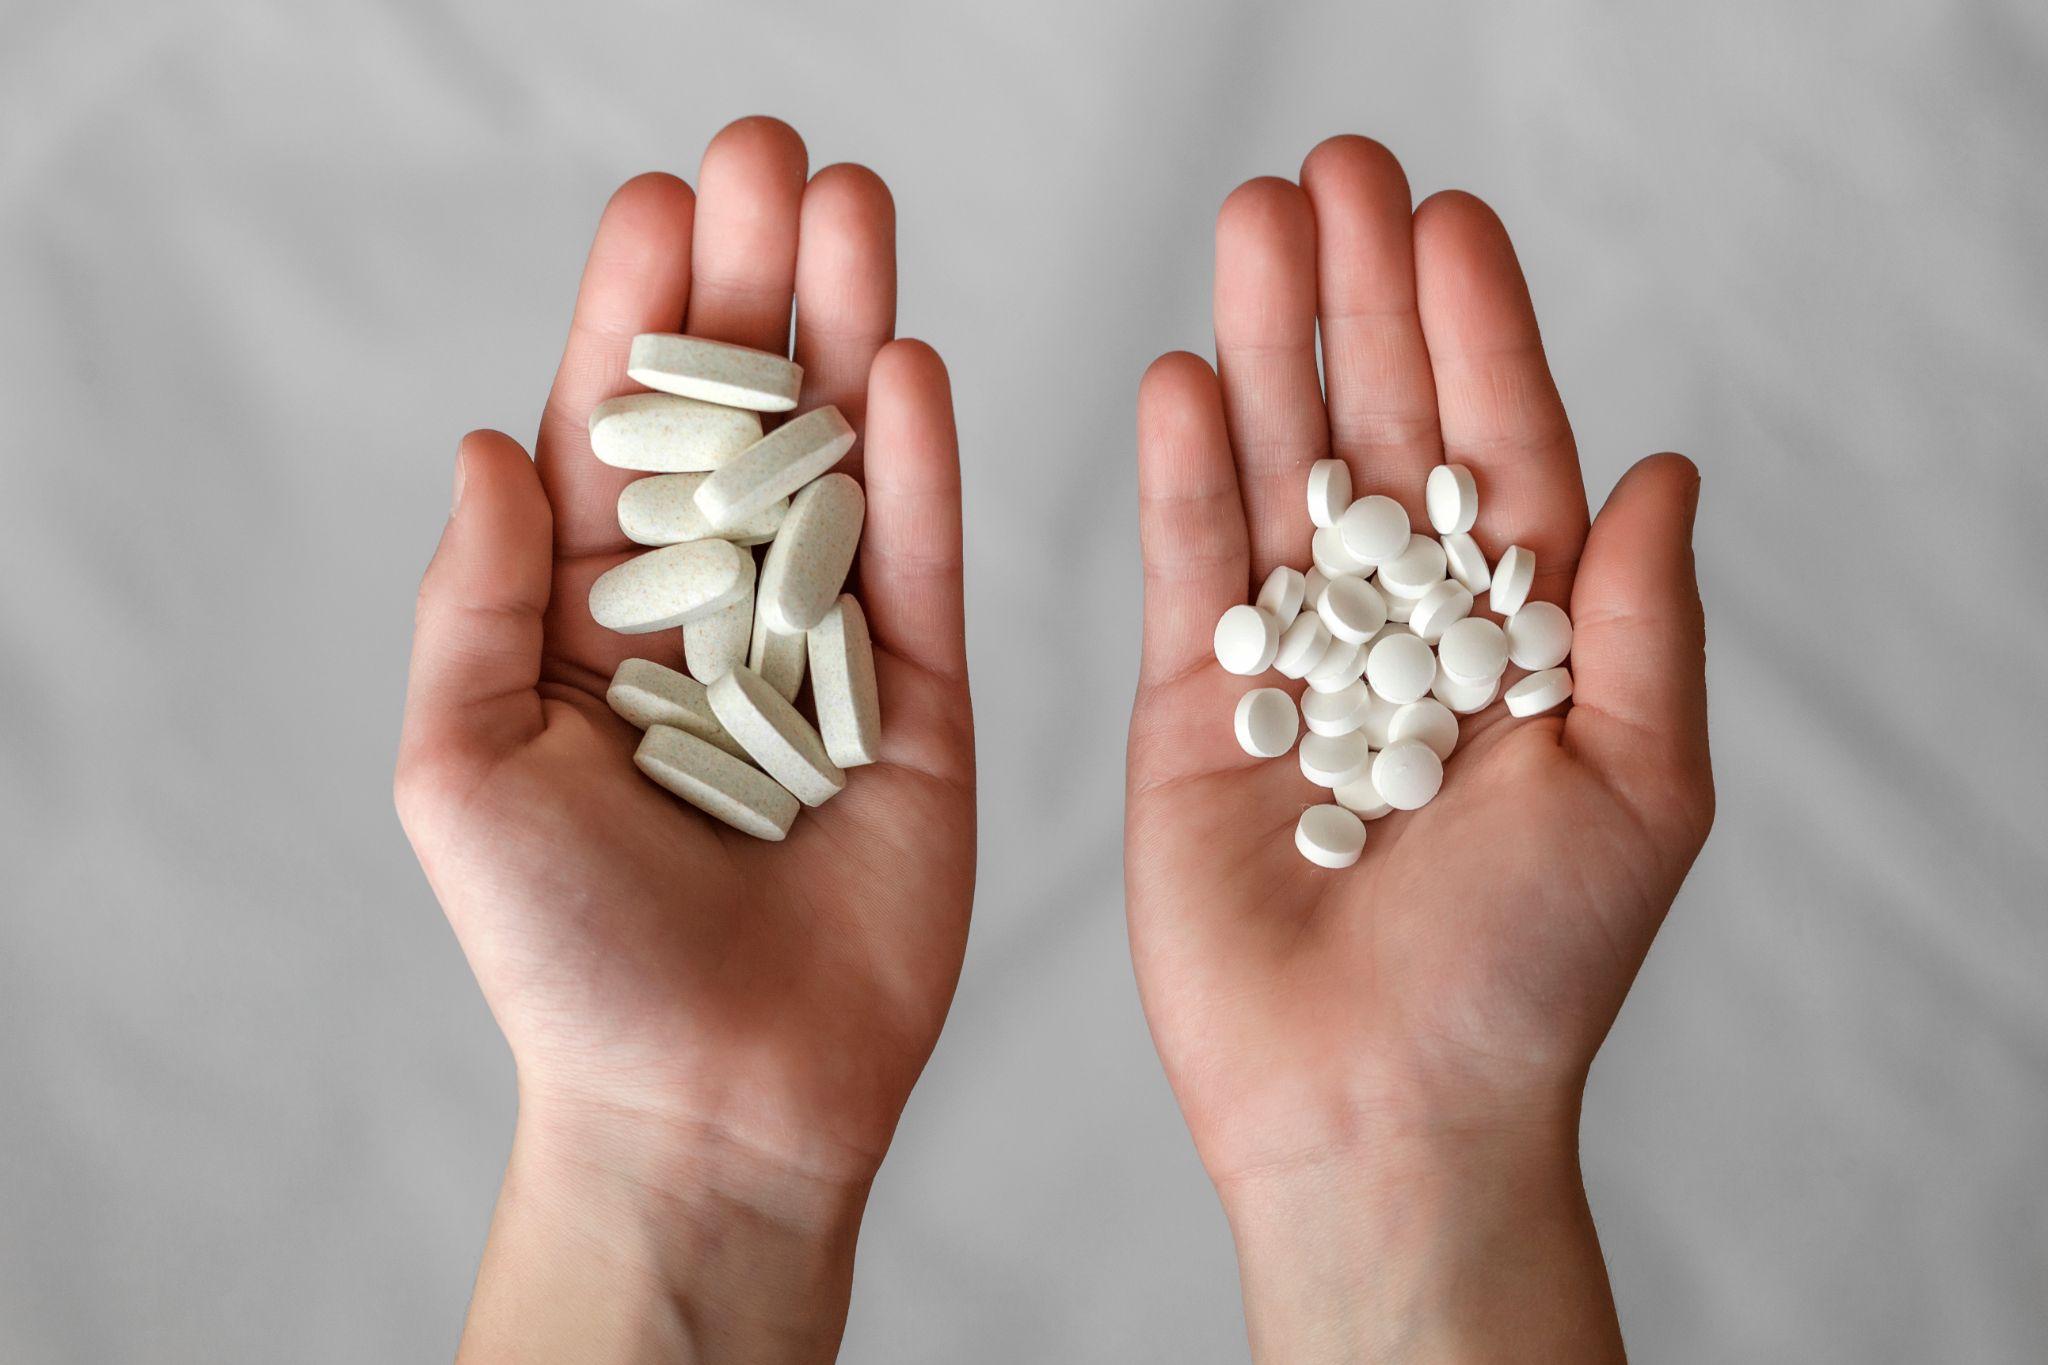 Pills in hands. Two handfuls of different pills on a gray background.